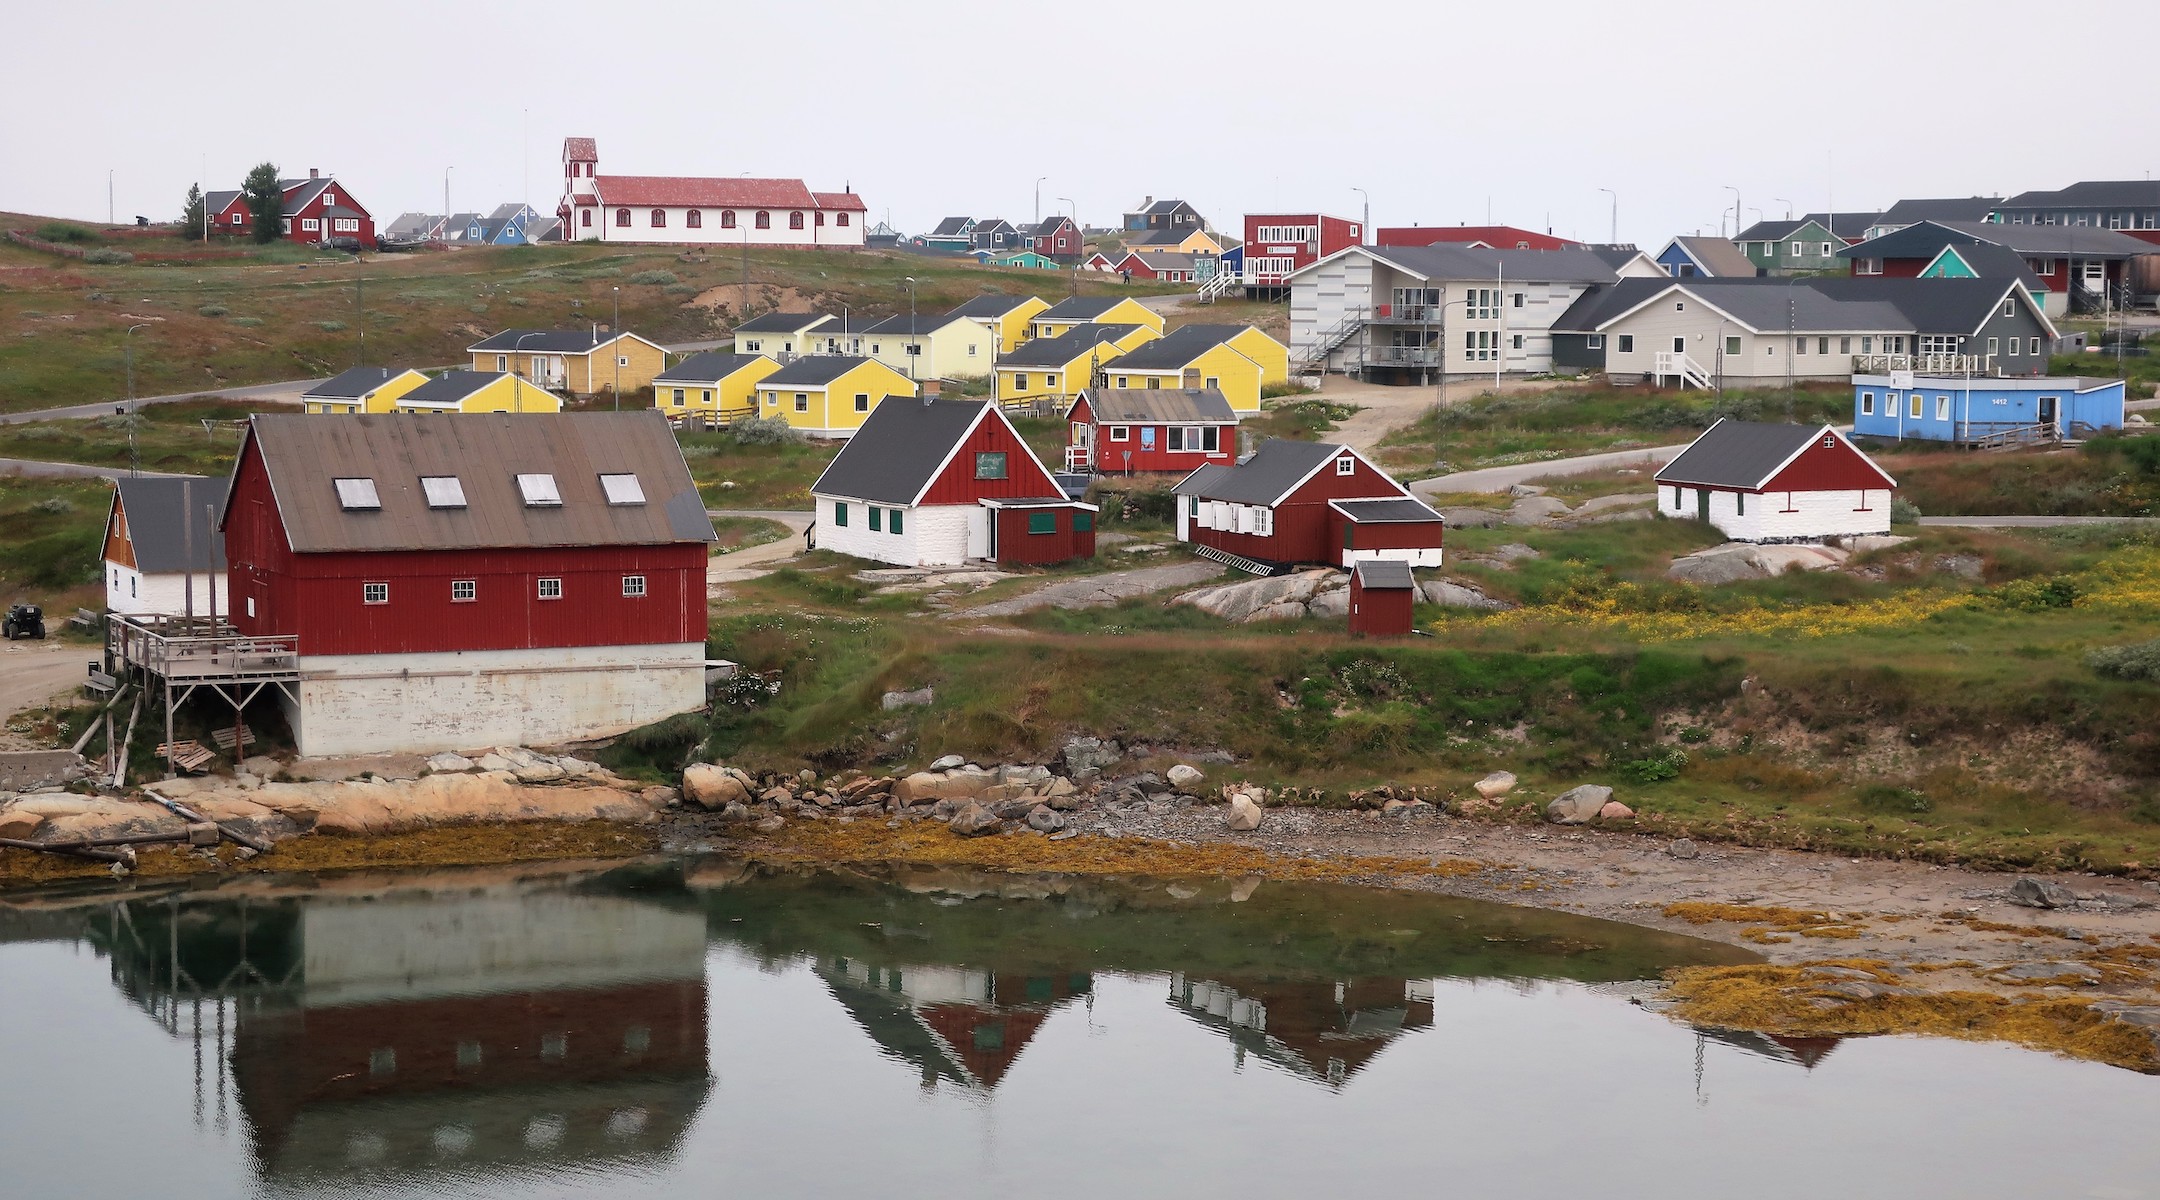 The town of Narsaq, located on the southwestern coast of Greenland, is home to about 1,300 people. (Dan Fellner)